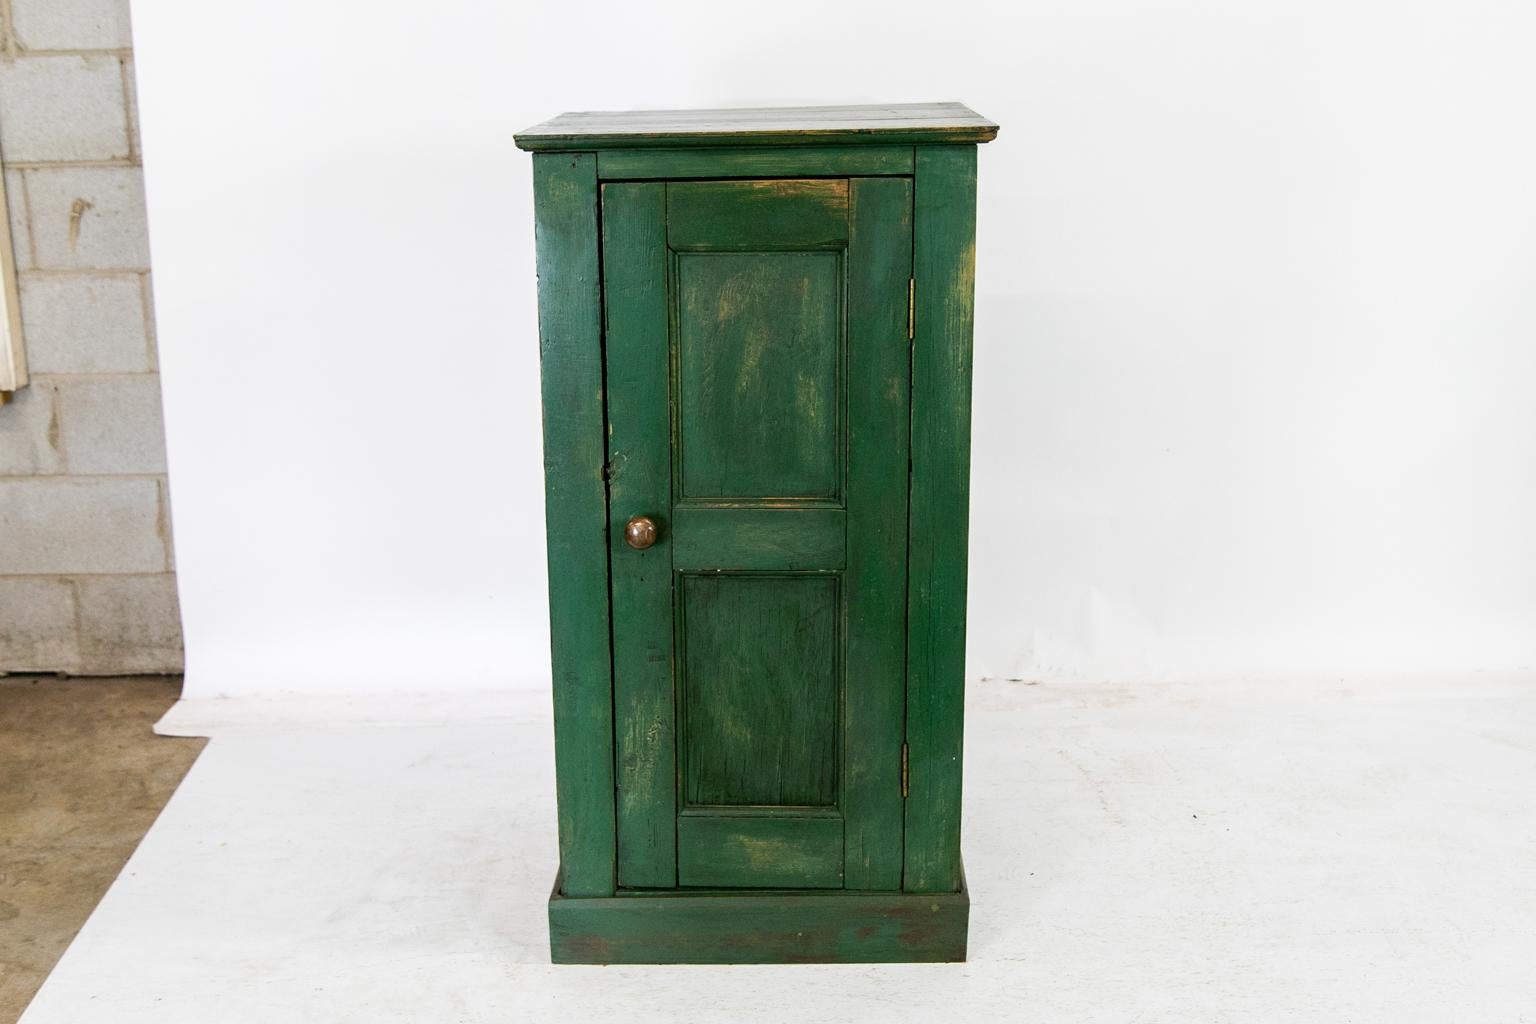 The front door and sides of this English pine storage cabinet have recessed panels framed by molding. The interior has four levels with fixed shelves. 
 